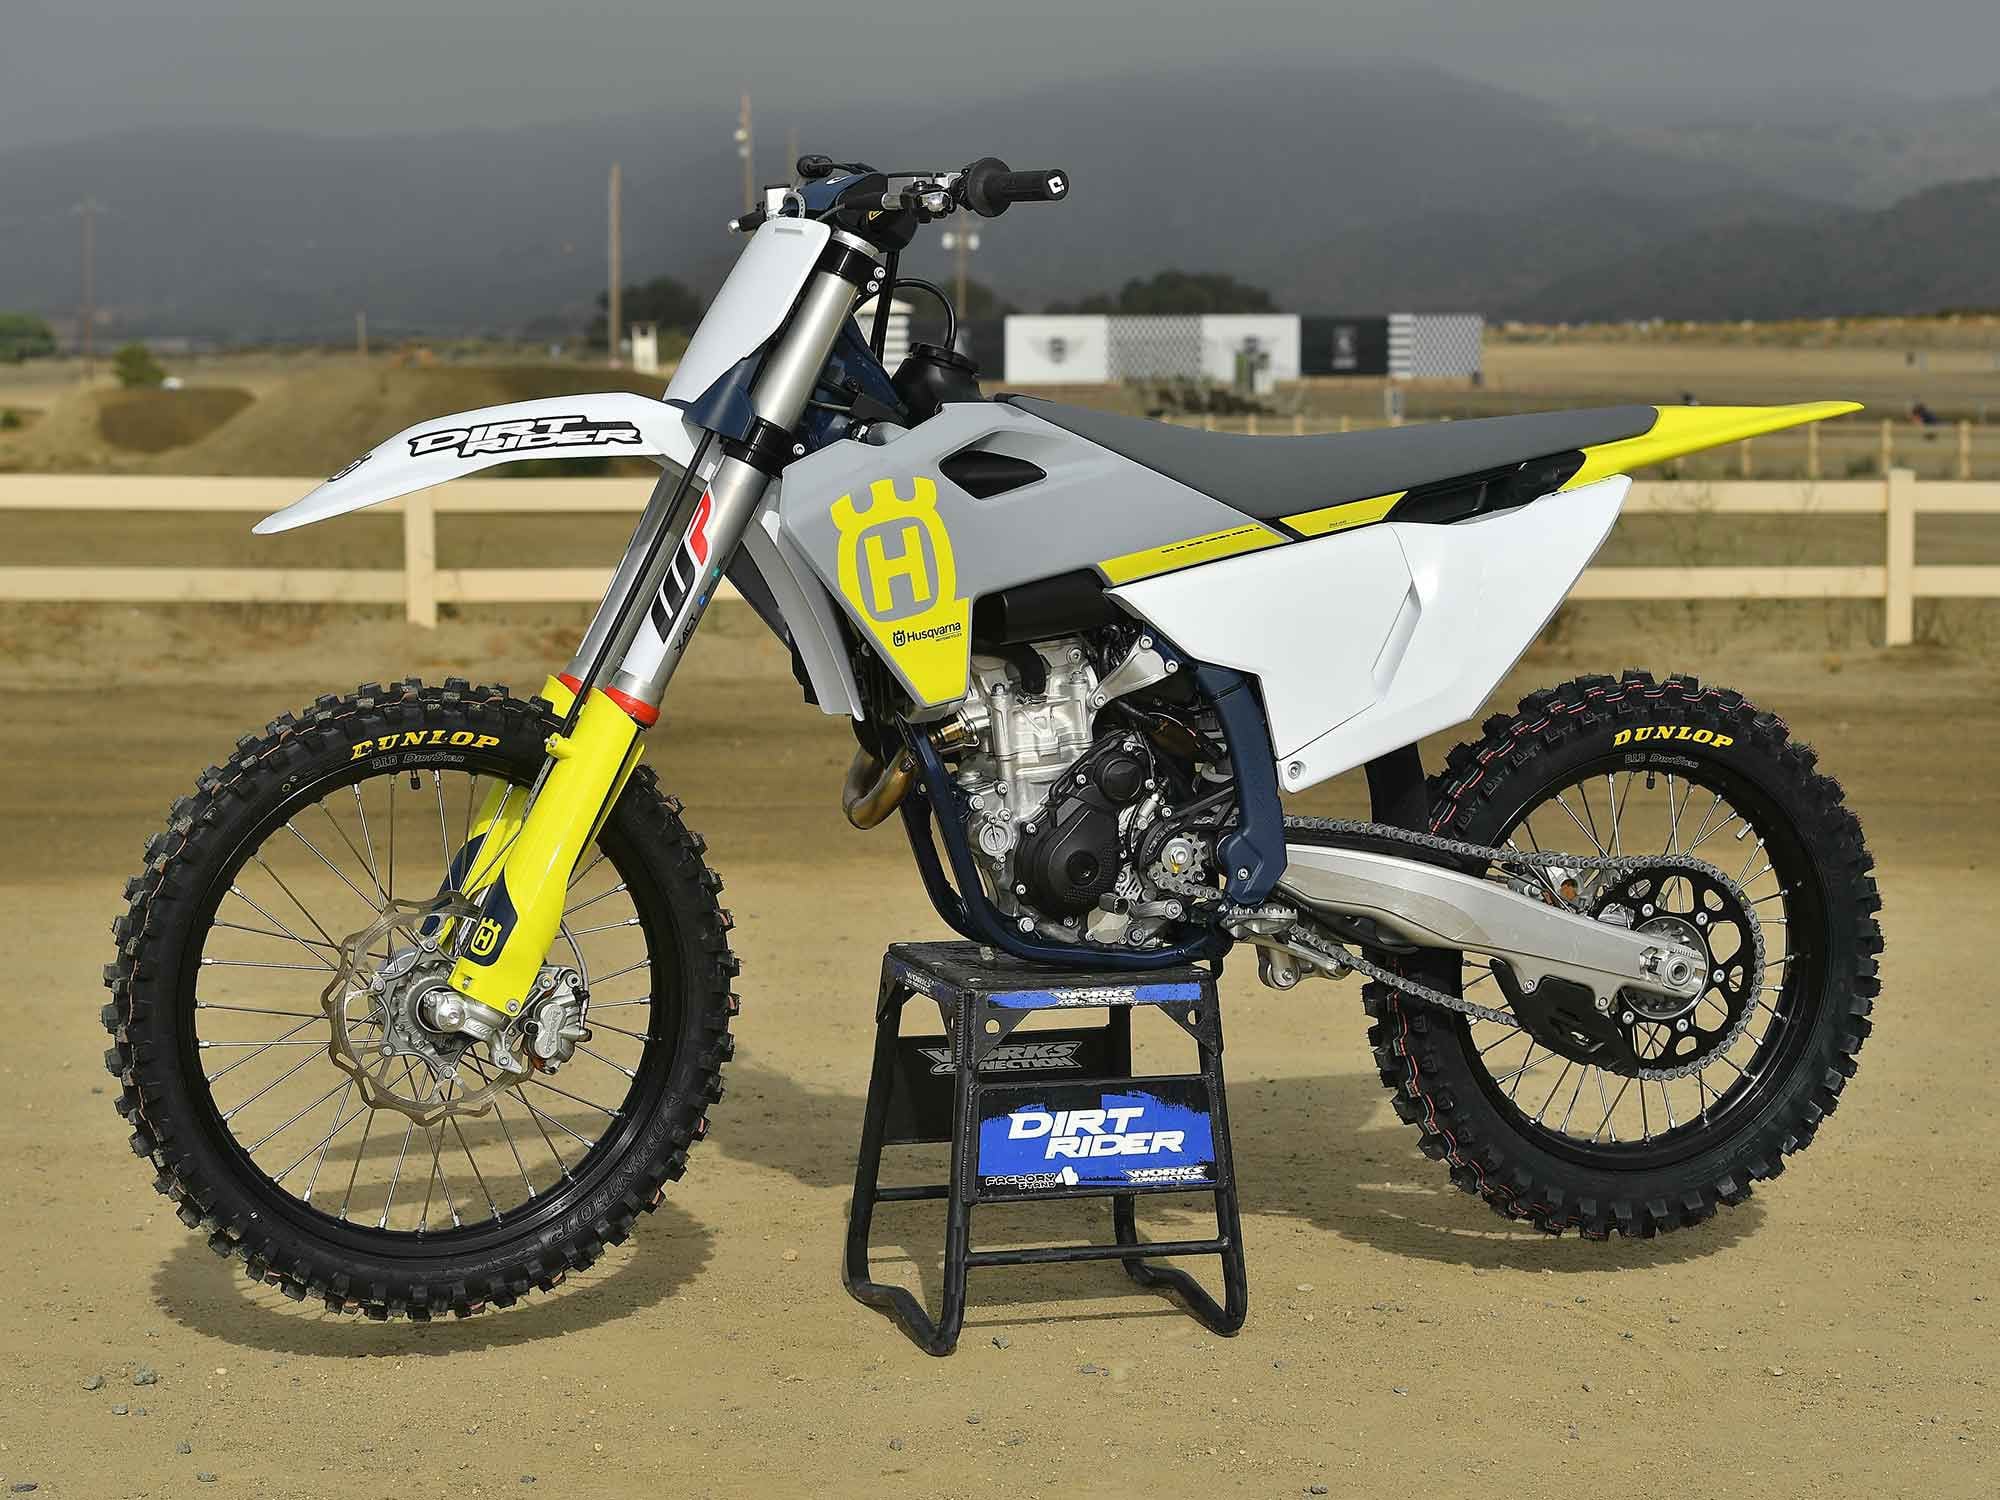 According to Husqvarna, its all-new 250 four-stroke motocross bike weighs 223 pounds without fuel in the 1.9-gallon tank.